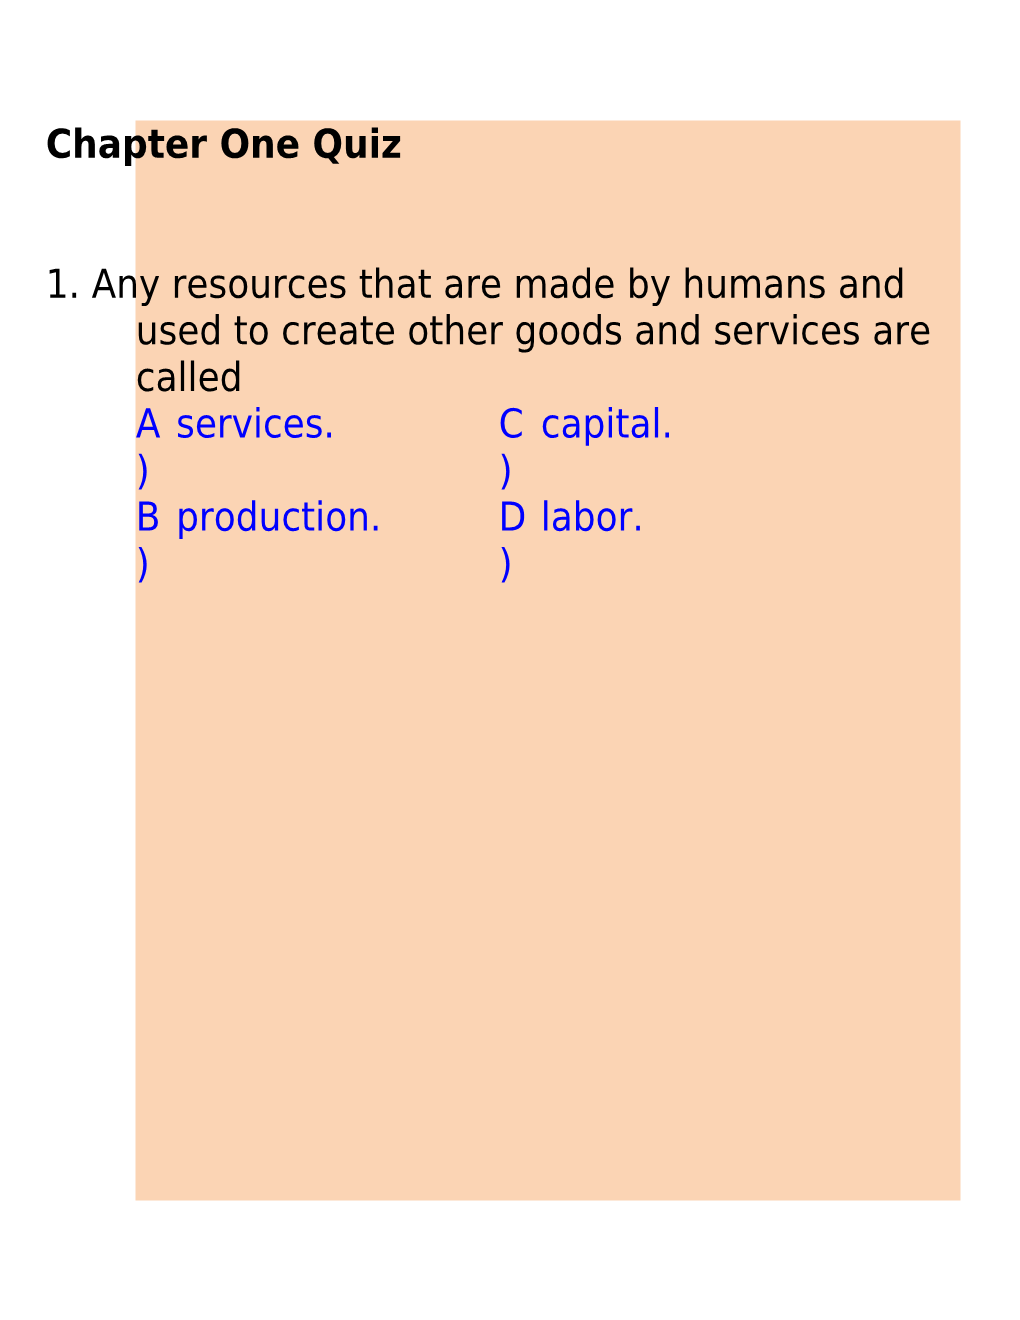 2.The Resources Used to Make All Goods and Services Are The